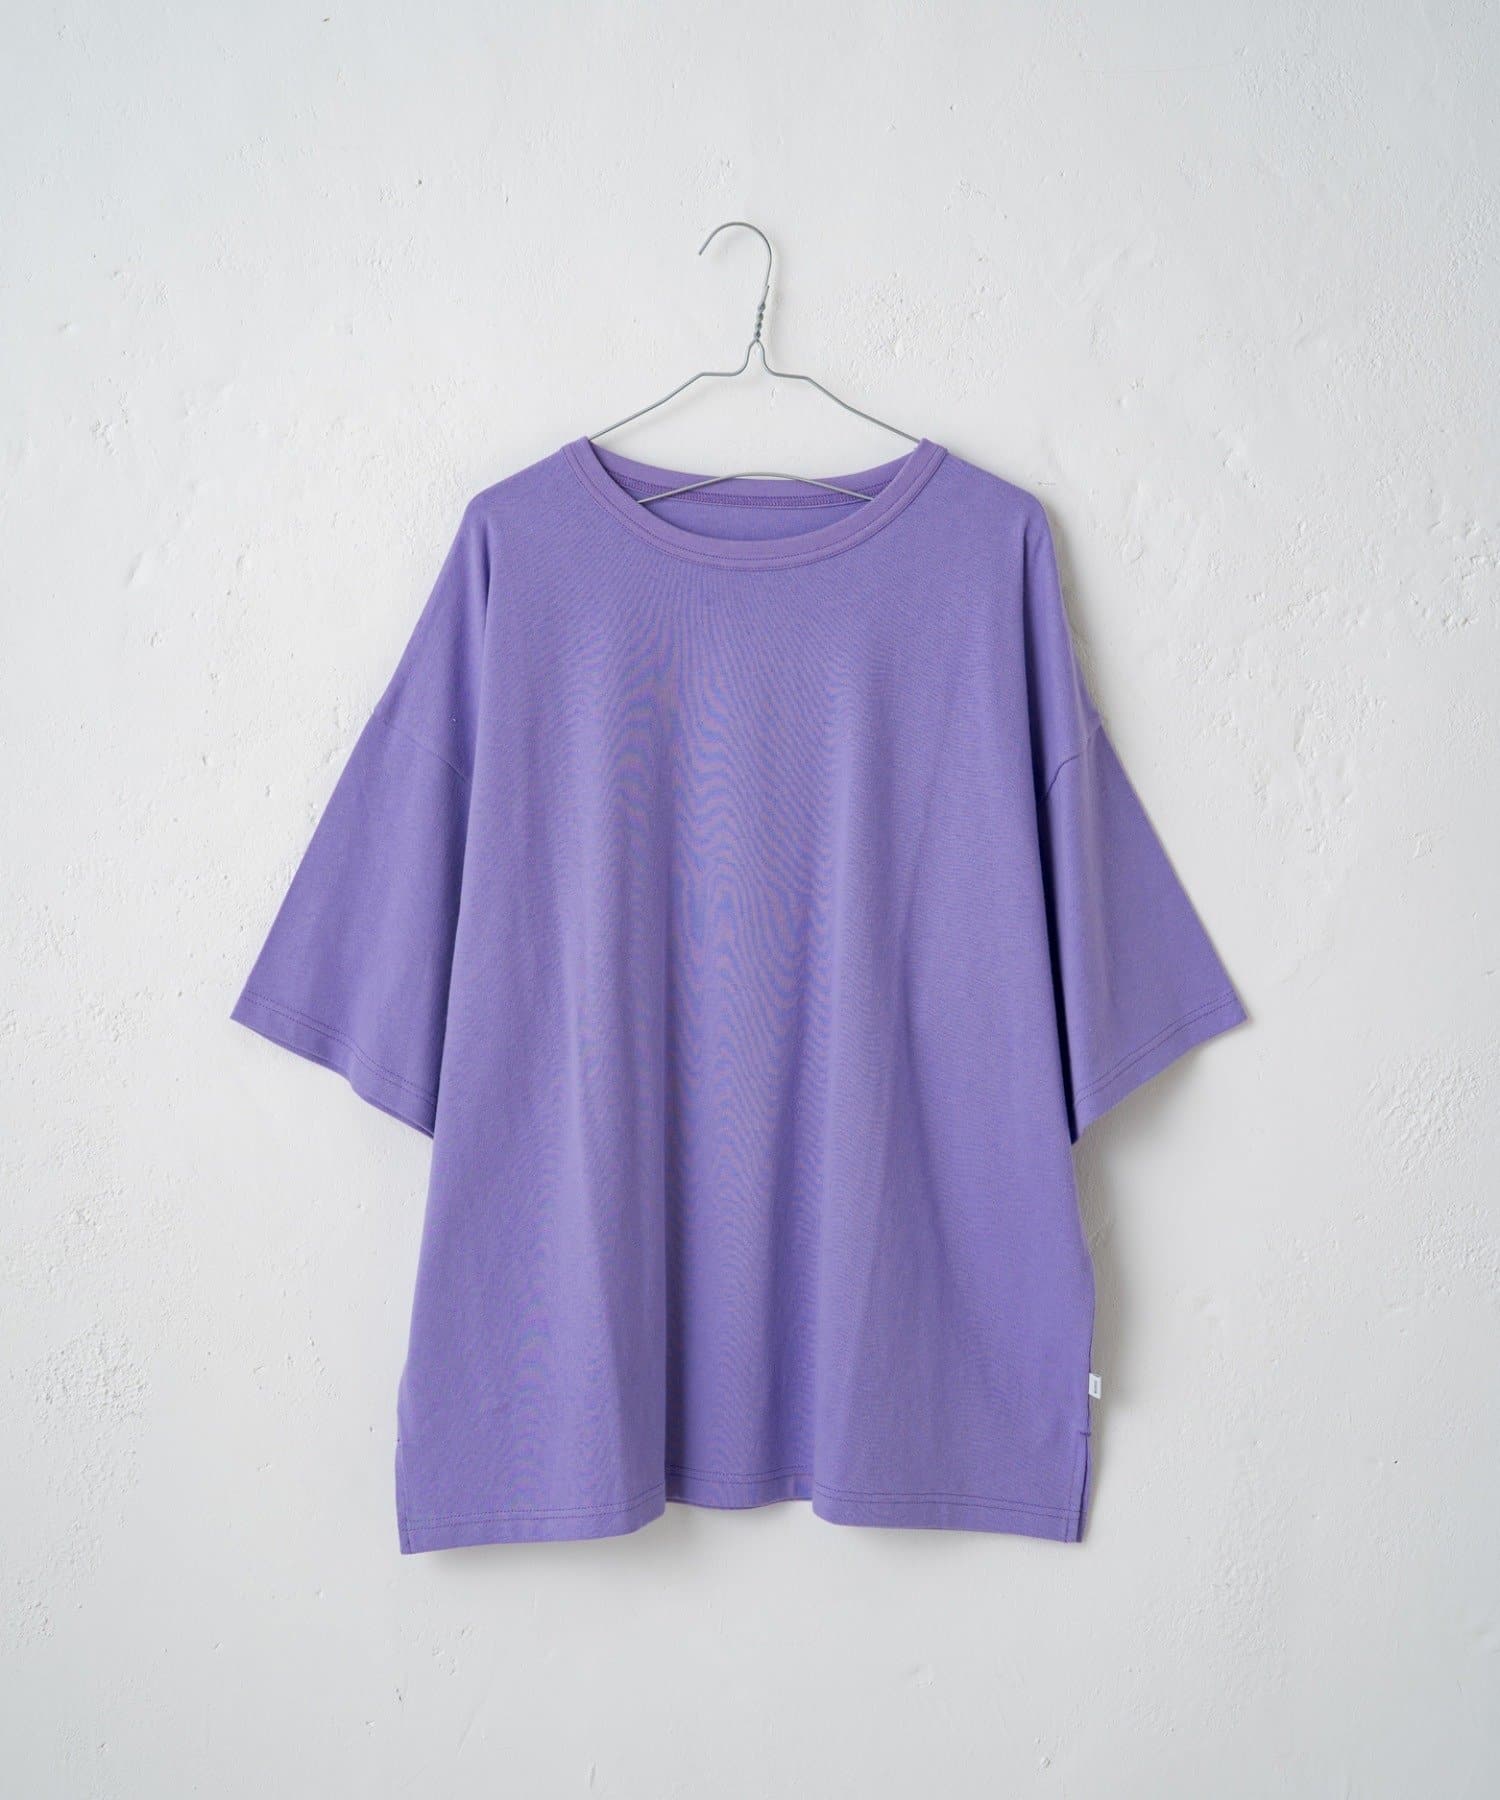 Kastane(カスタネ) 【WHIMSIC】HEAVY WEIGHT OVER SIZED T-SHIRT